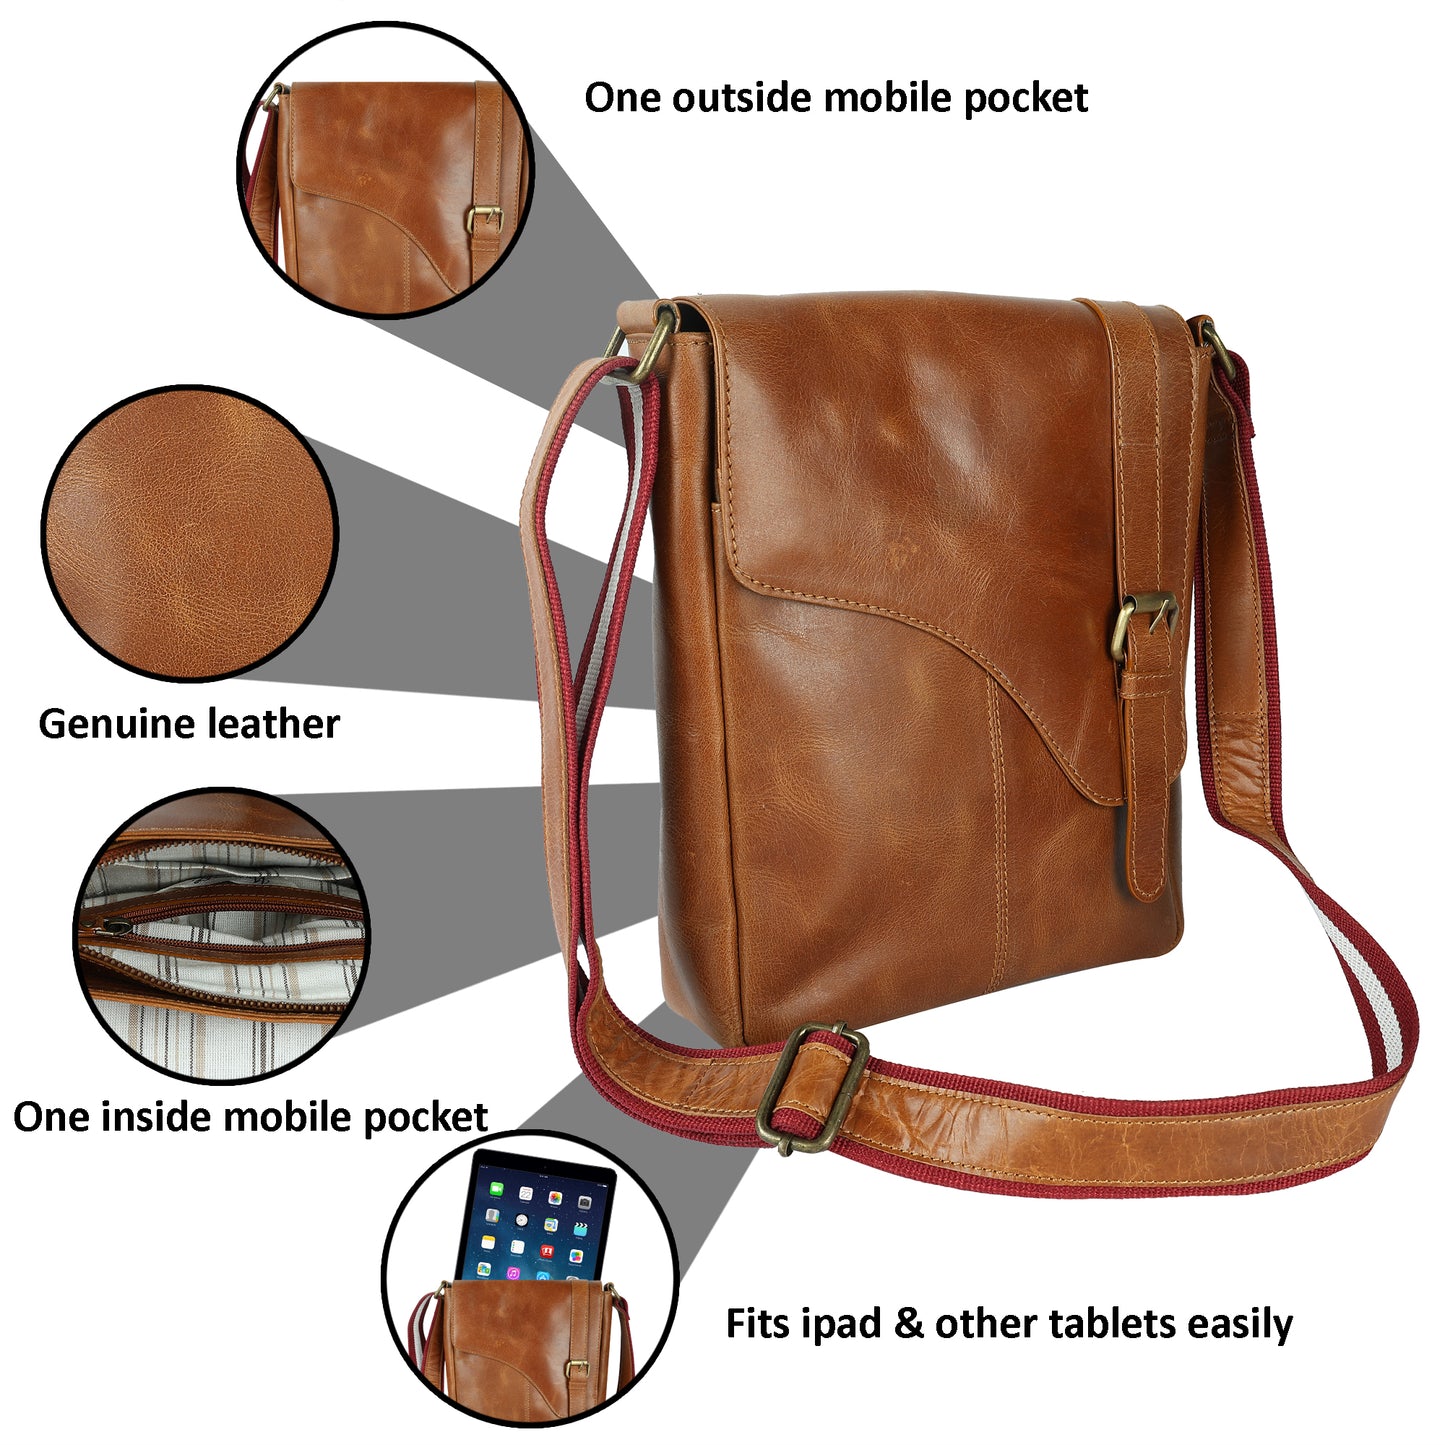 Starlight Crossbody Leather Messenger Bag fits an ipad and more